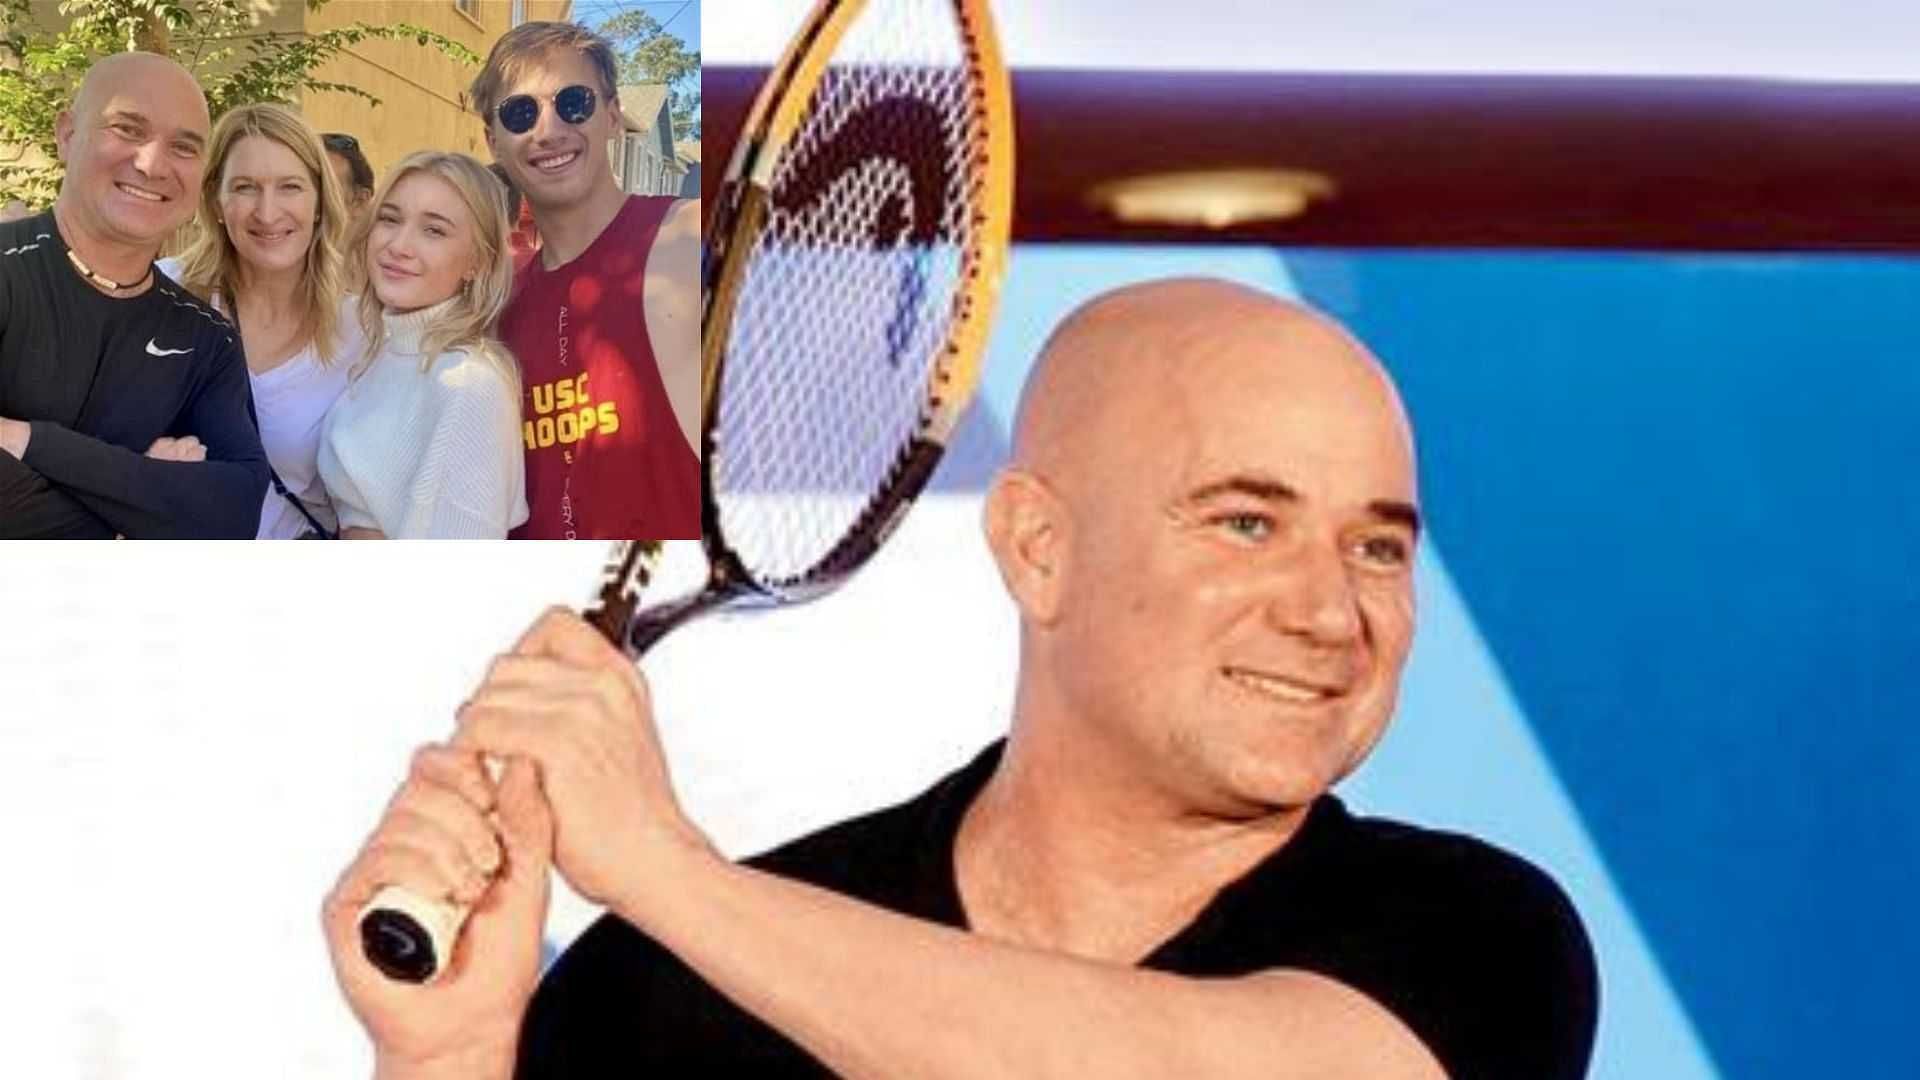 Andre Agassi with wife Steffi Graff and kids